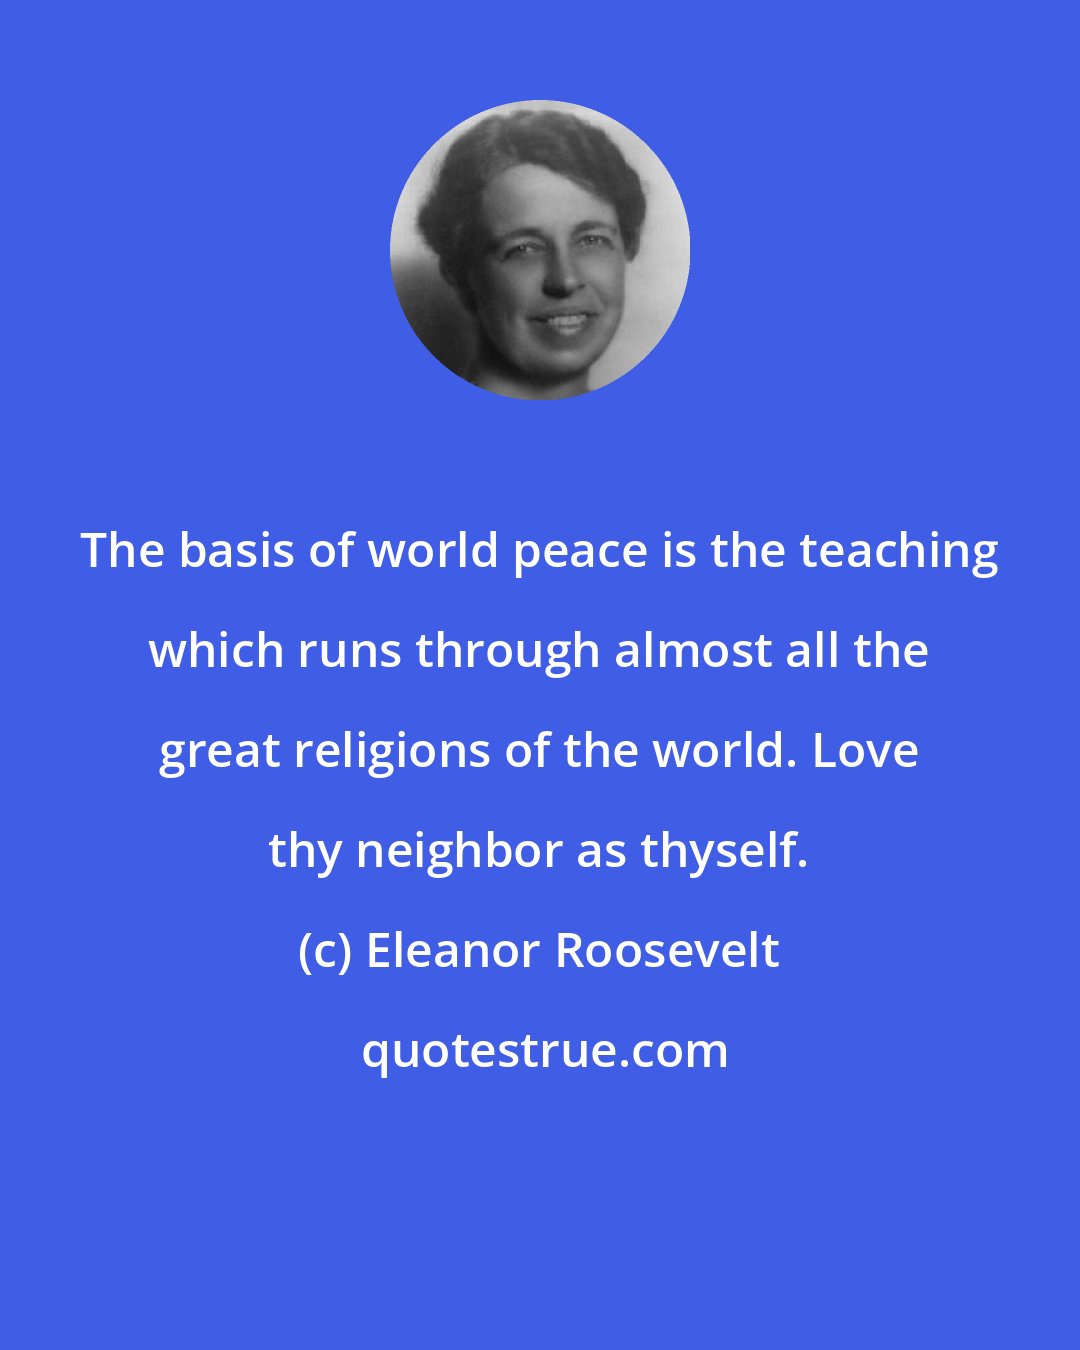 Eleanor Roosevelt: The basis of world peace is the teaching which runs through almost all the great religions of the world. Love thy neighbor as thyself.